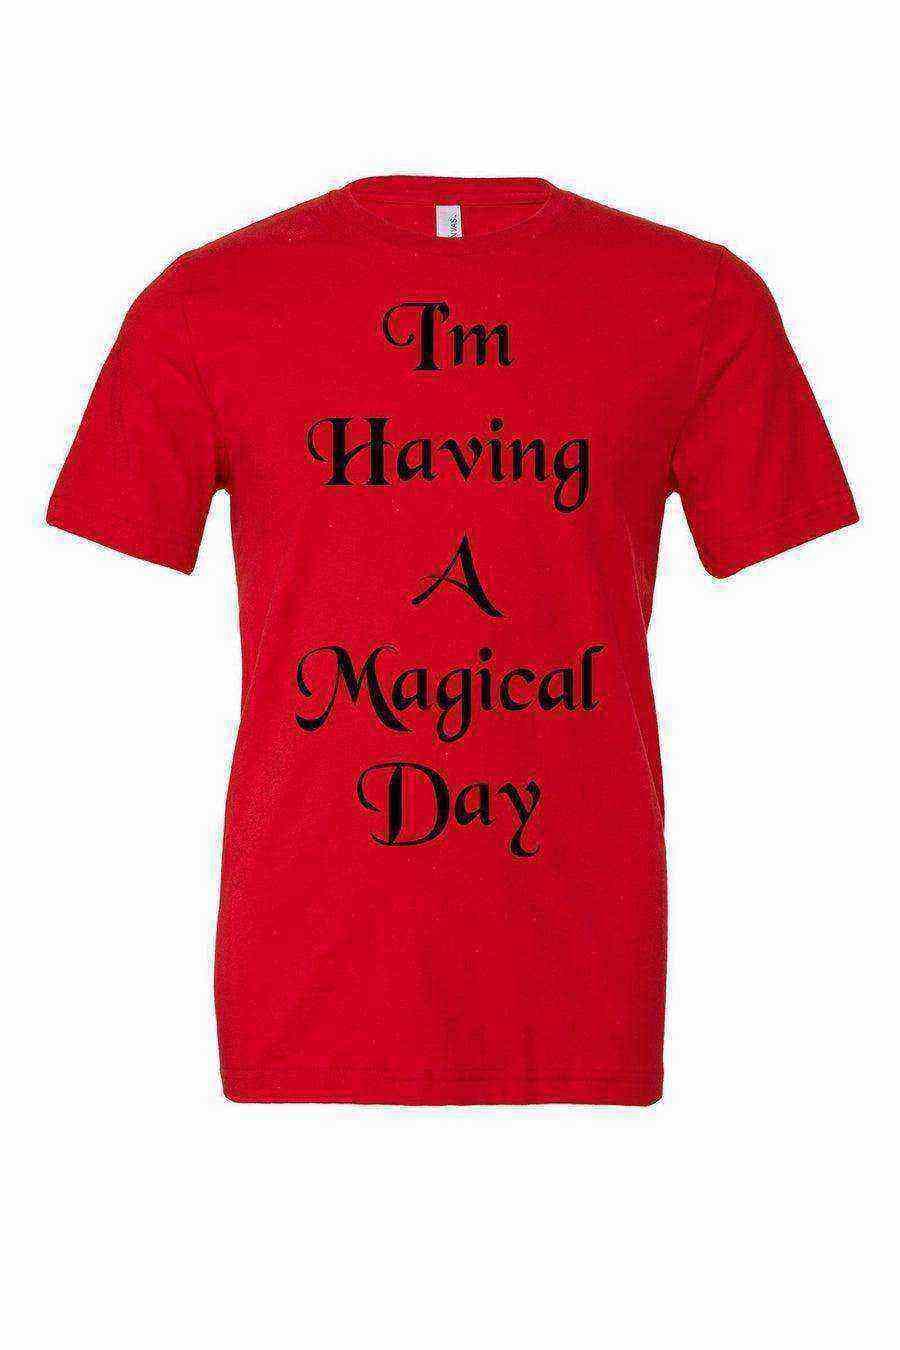 Womens | Im Having A Magical Day - Dylan's Tees